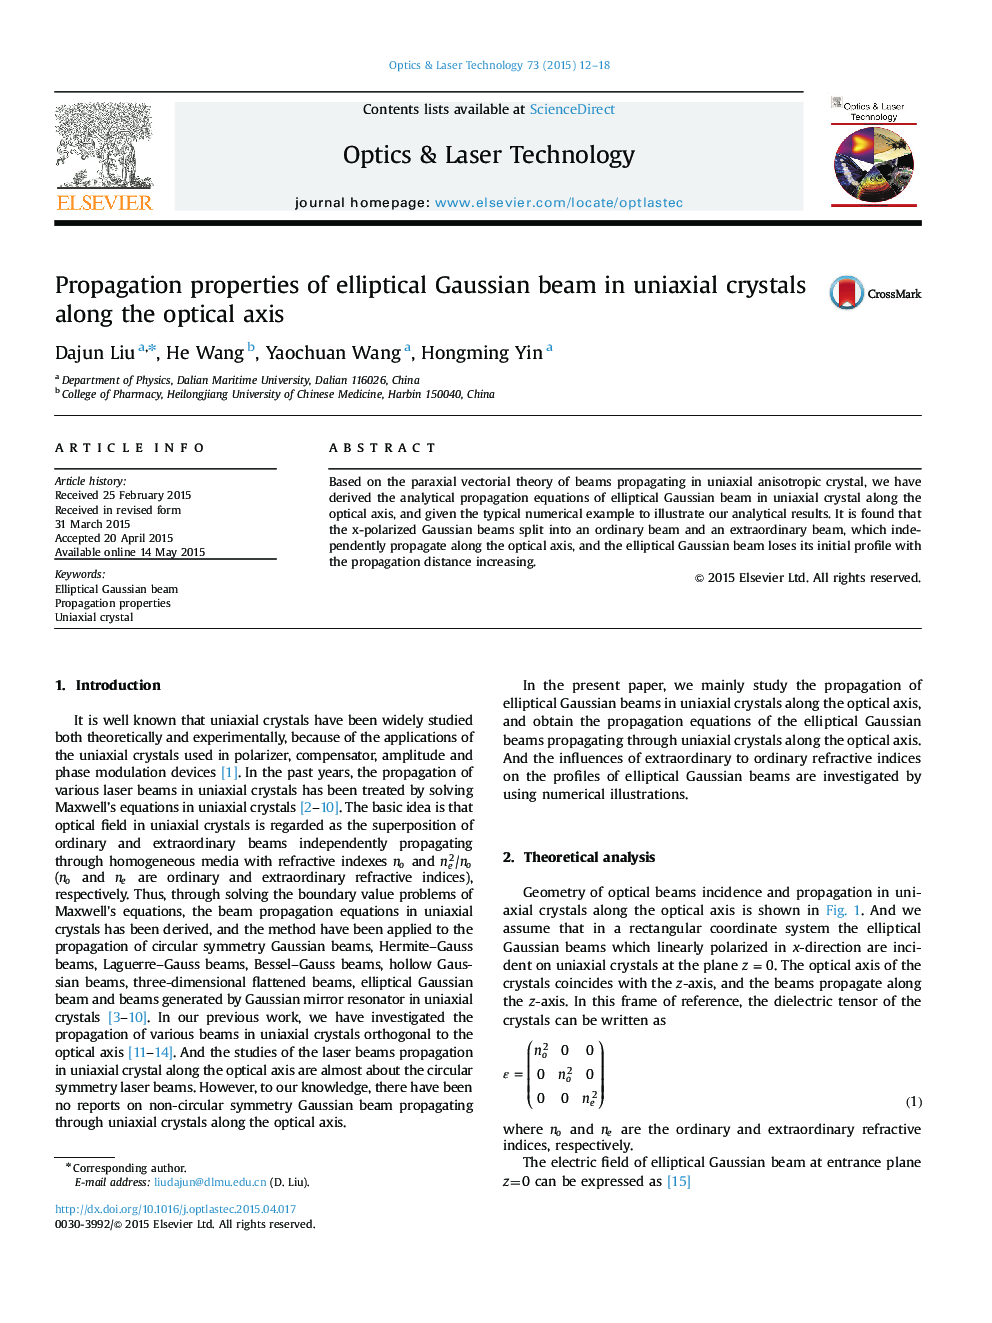 Propagation properties of elliptical Gaussian beam in uniaxial crystals along the optical axis